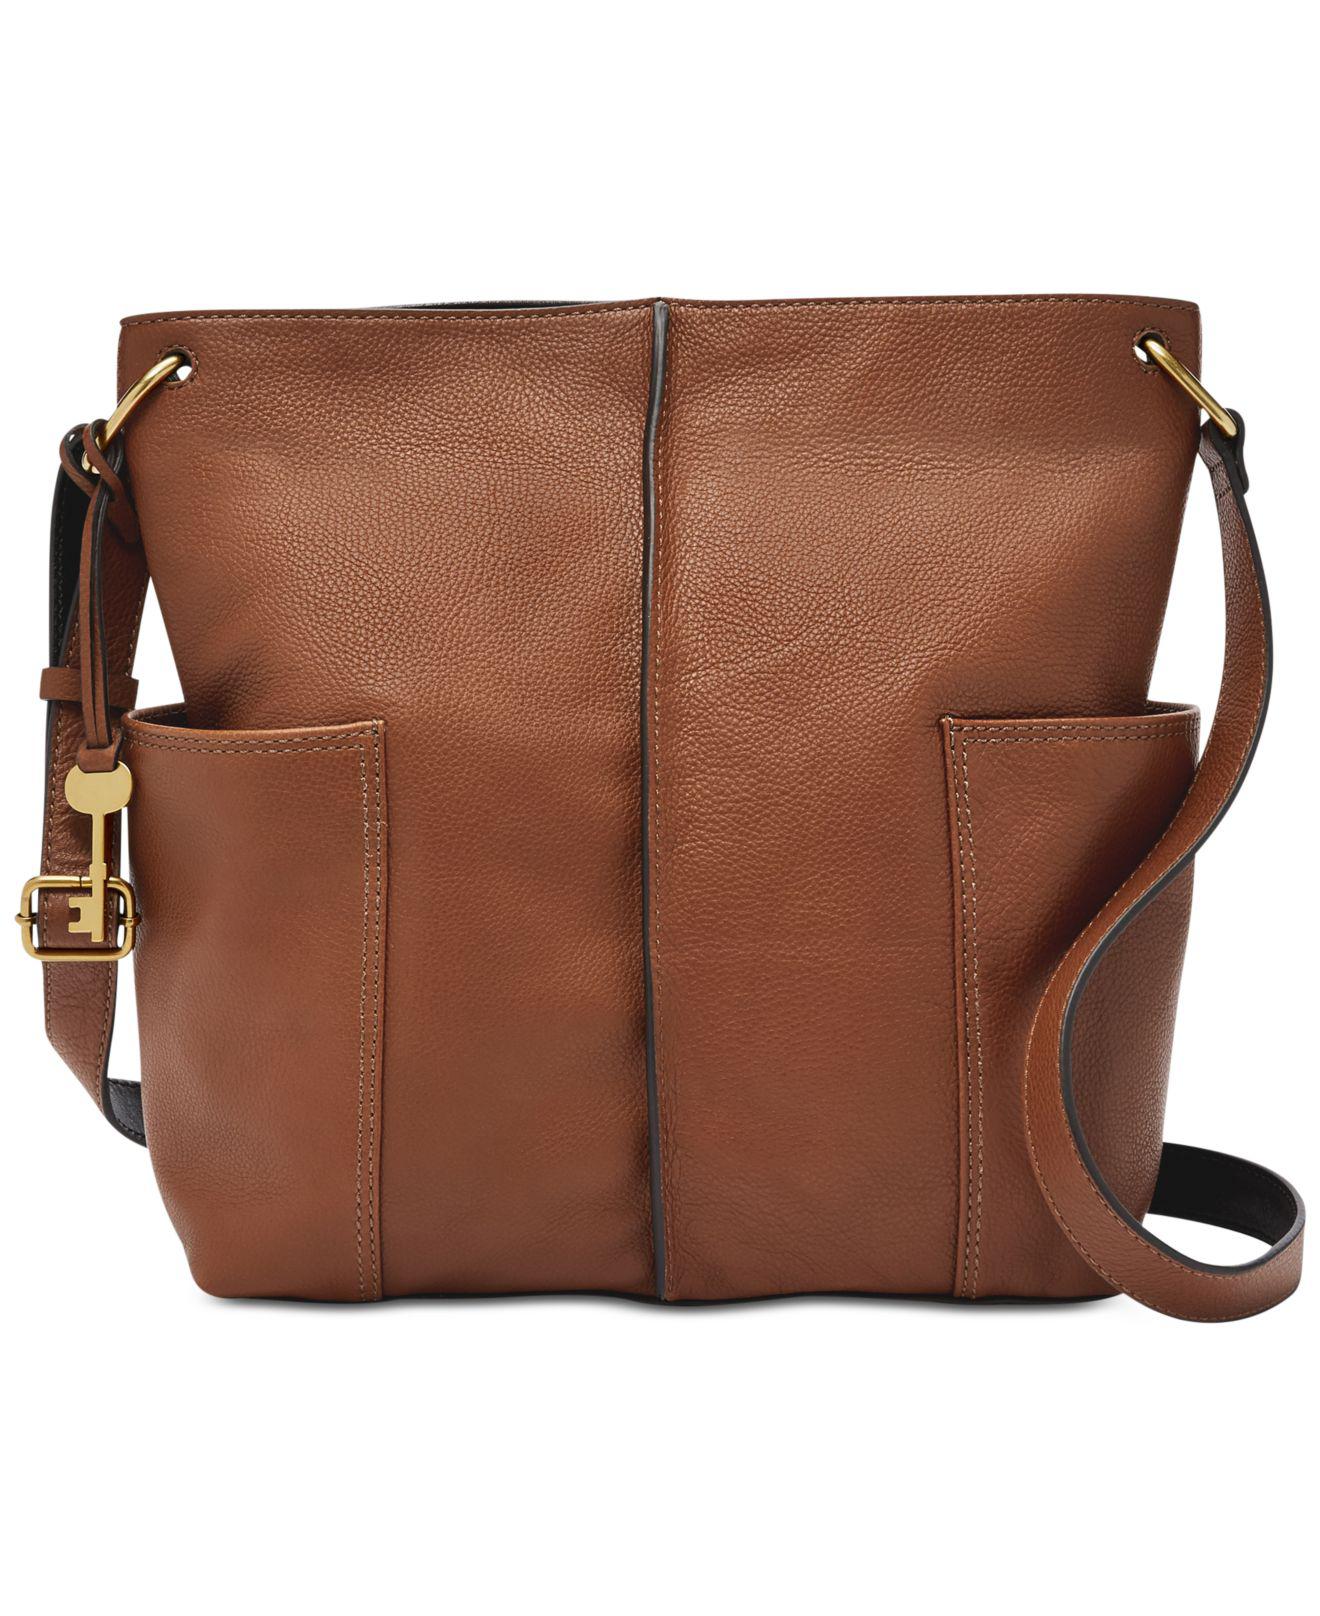 Lyst - Fossil Lane North South Leather Crossbody in Brown